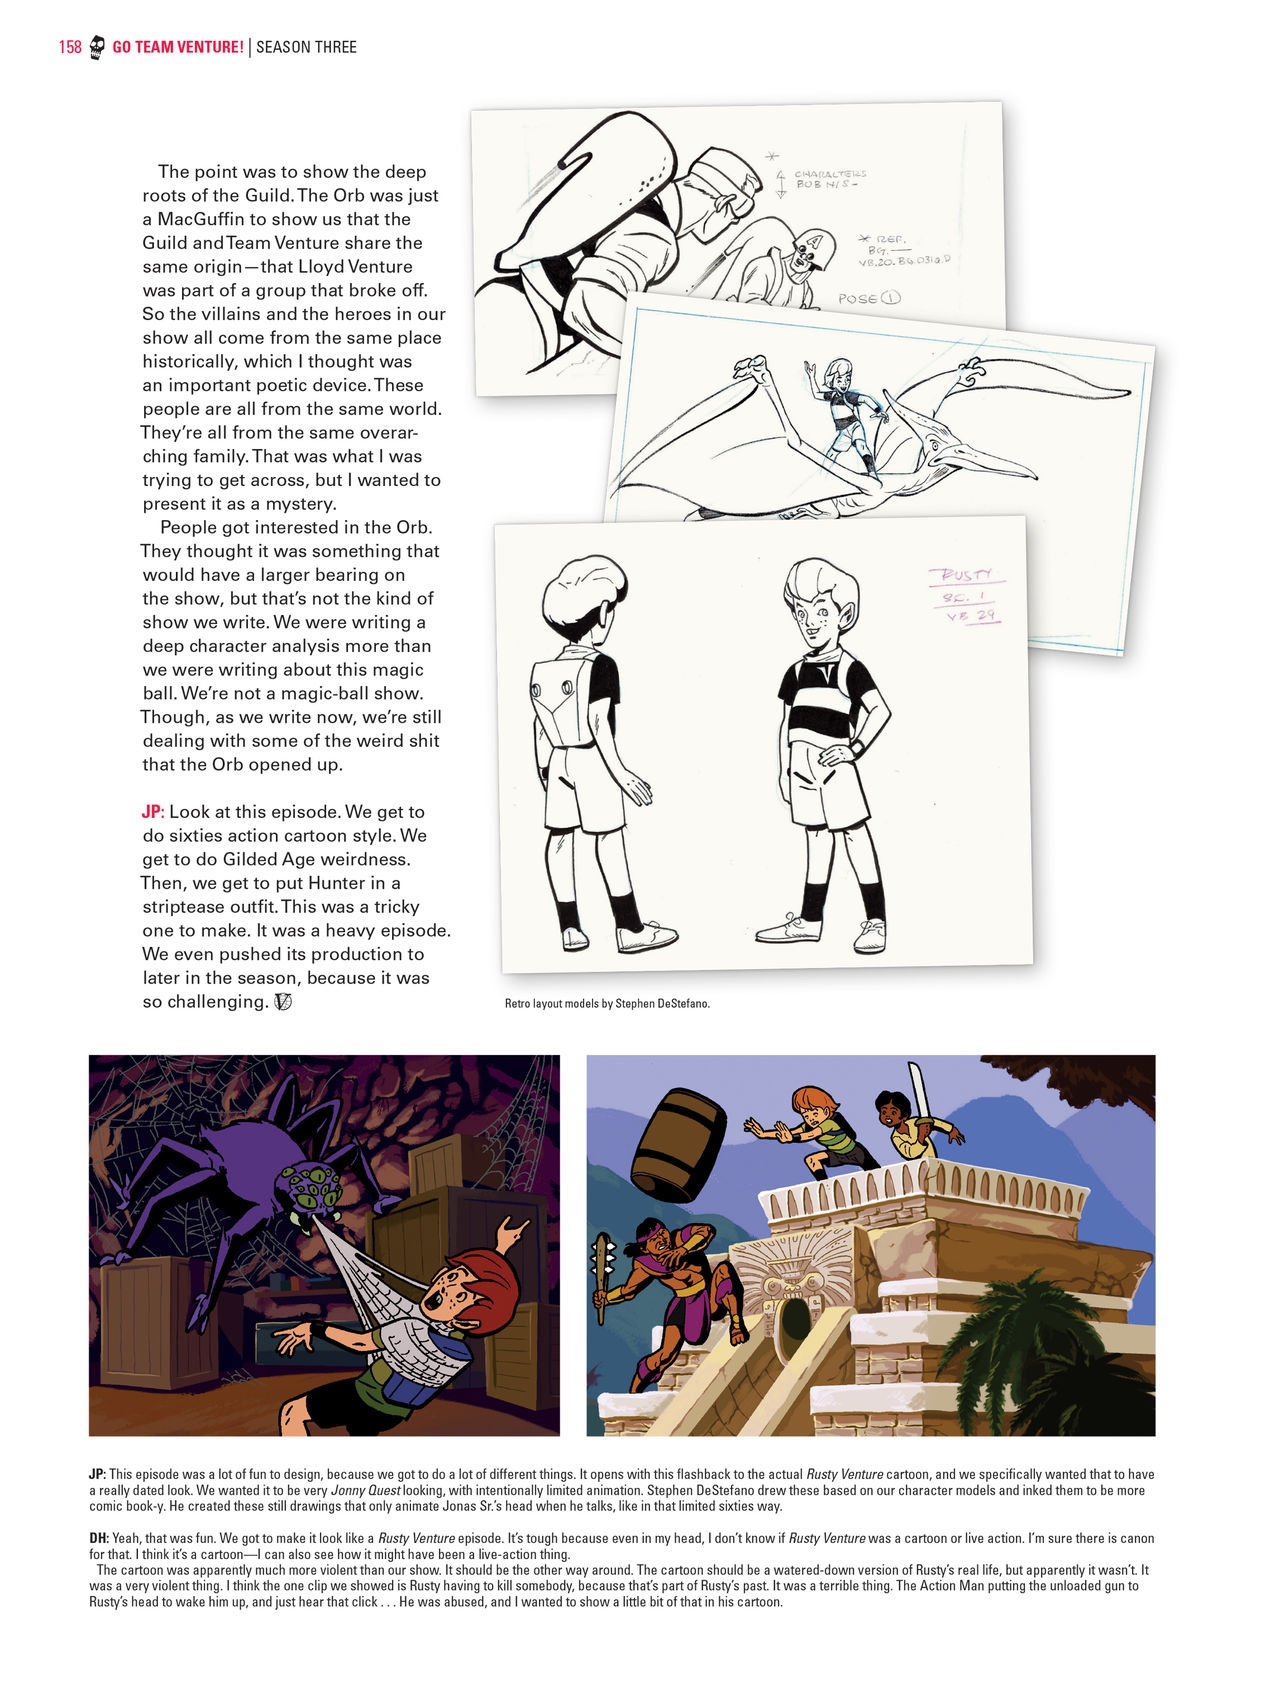 Go Team Venture! - The Art and Making of the Venture Bros 156